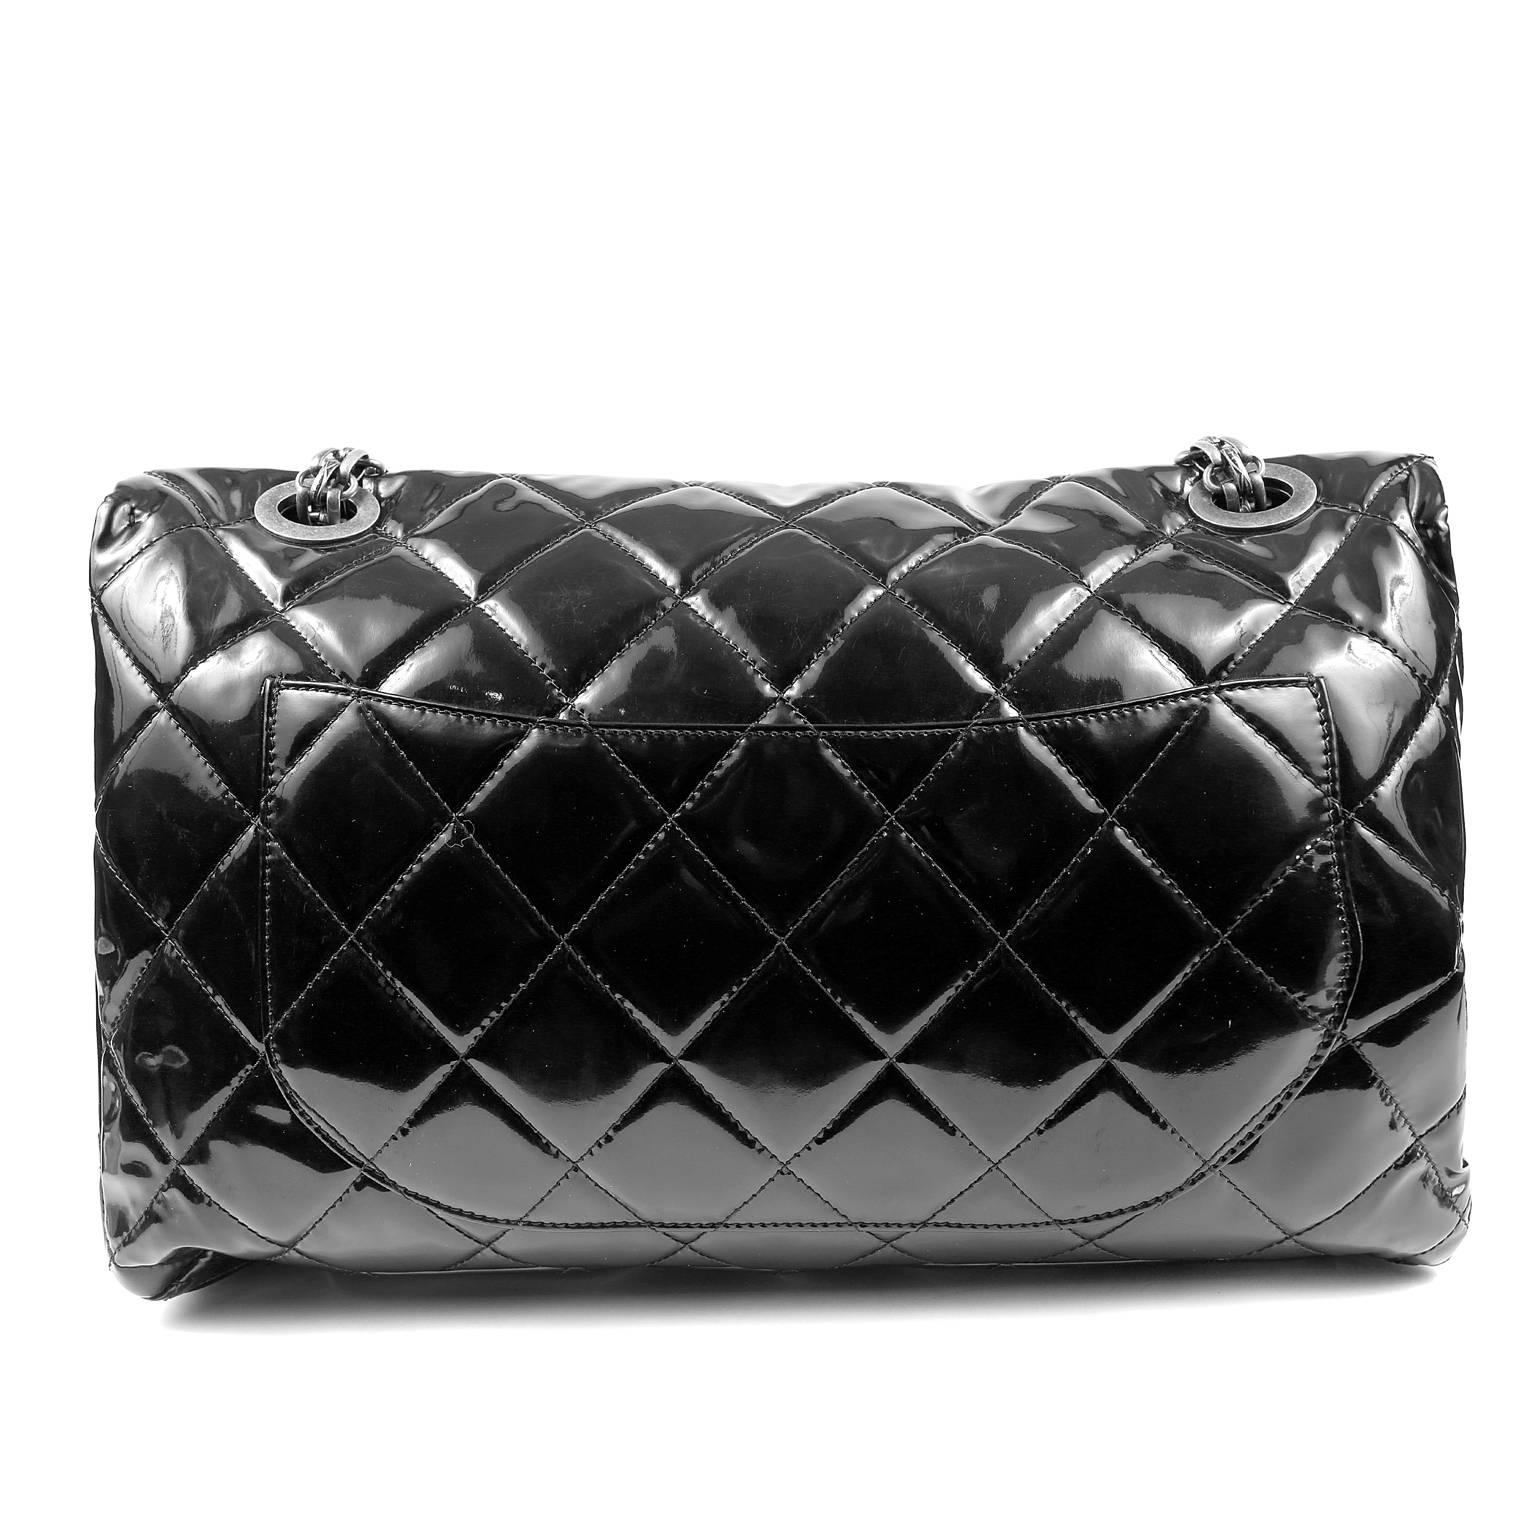 Chanel Black Patent Leather XXL Reissue Bag- PRISTINE
  It is particularly rare in the oversized silhouette with ruthenium hardware.
Glossy black patent leather is quilted in signature Chanel diamond pattern.  Ruthenium mademoiselle twist lock